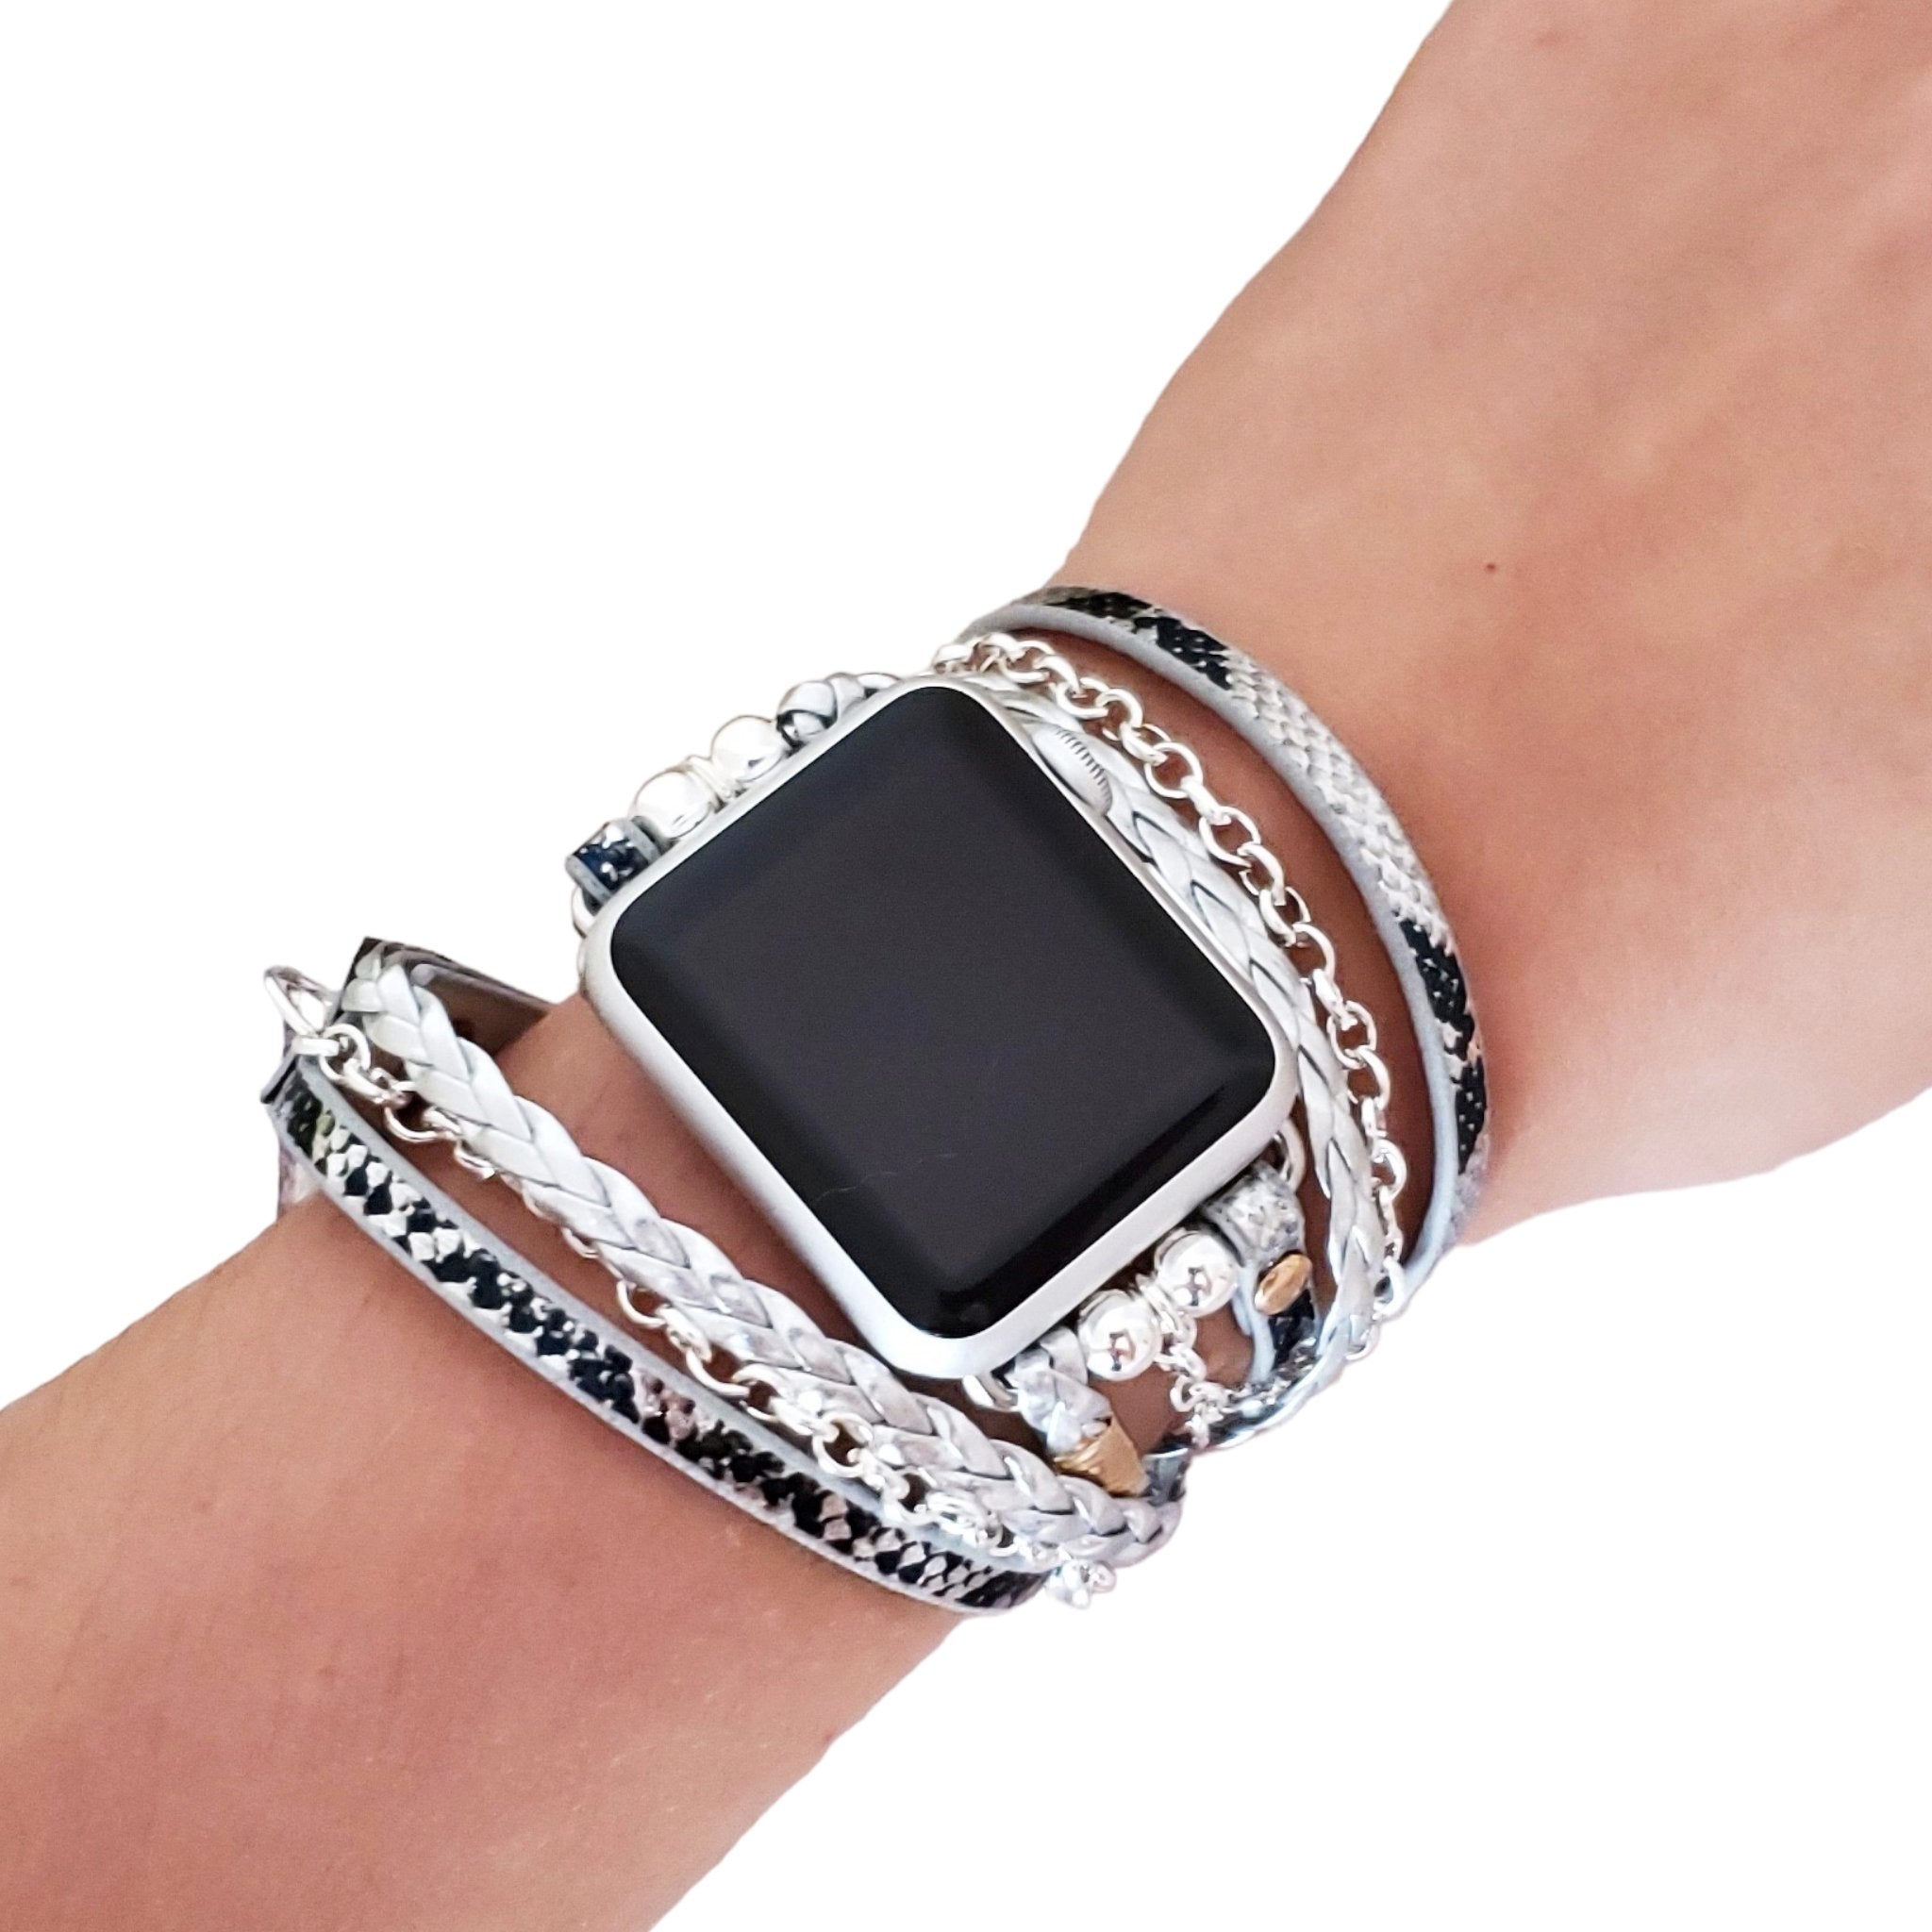 Boho Chic Wrap Snake Skin Watch Band with Silver Chain for apple watch 8 7 6 5 4 3 2 1 SE, apple watch band 40mm, iwatch strap 44mm, replacement band for iwatch